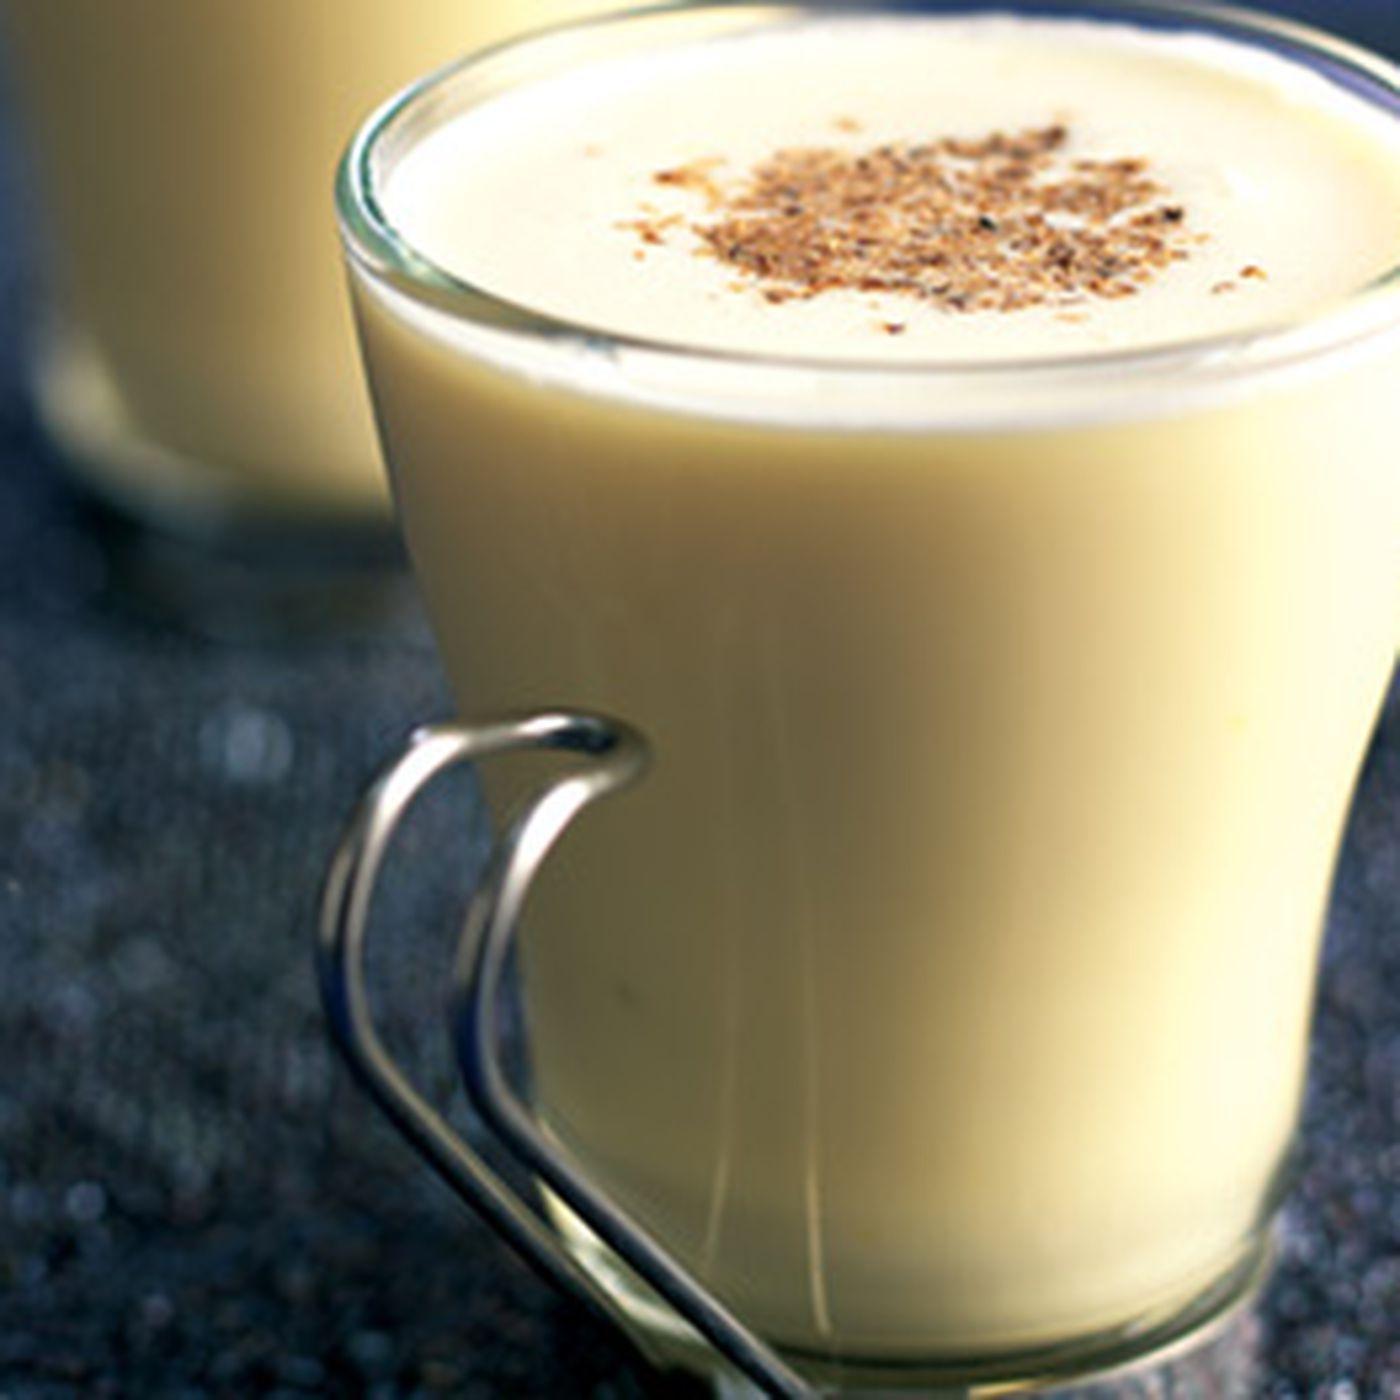 How to Tailgate: 'Tis the Season for Egg Nog From The Blue